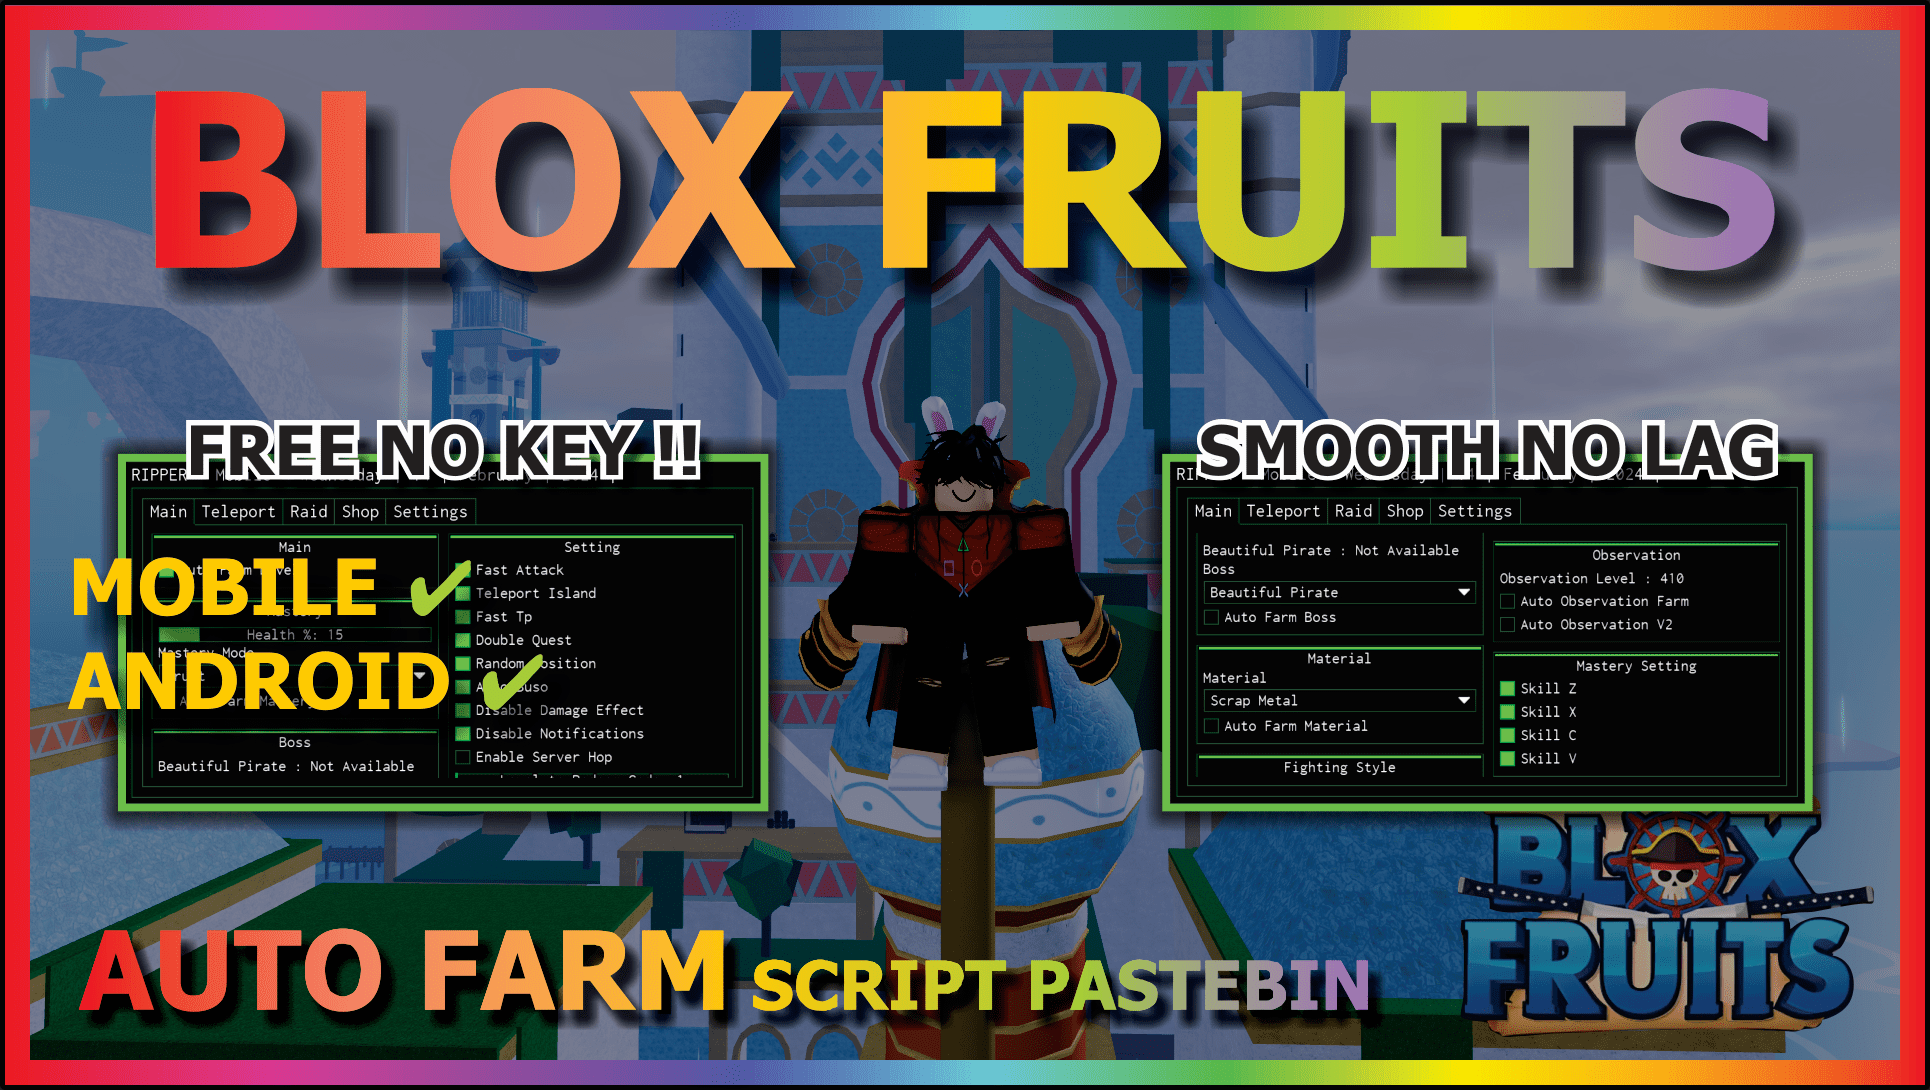 You are currently viewing BLOX FRUITS (RIPPER NEW)